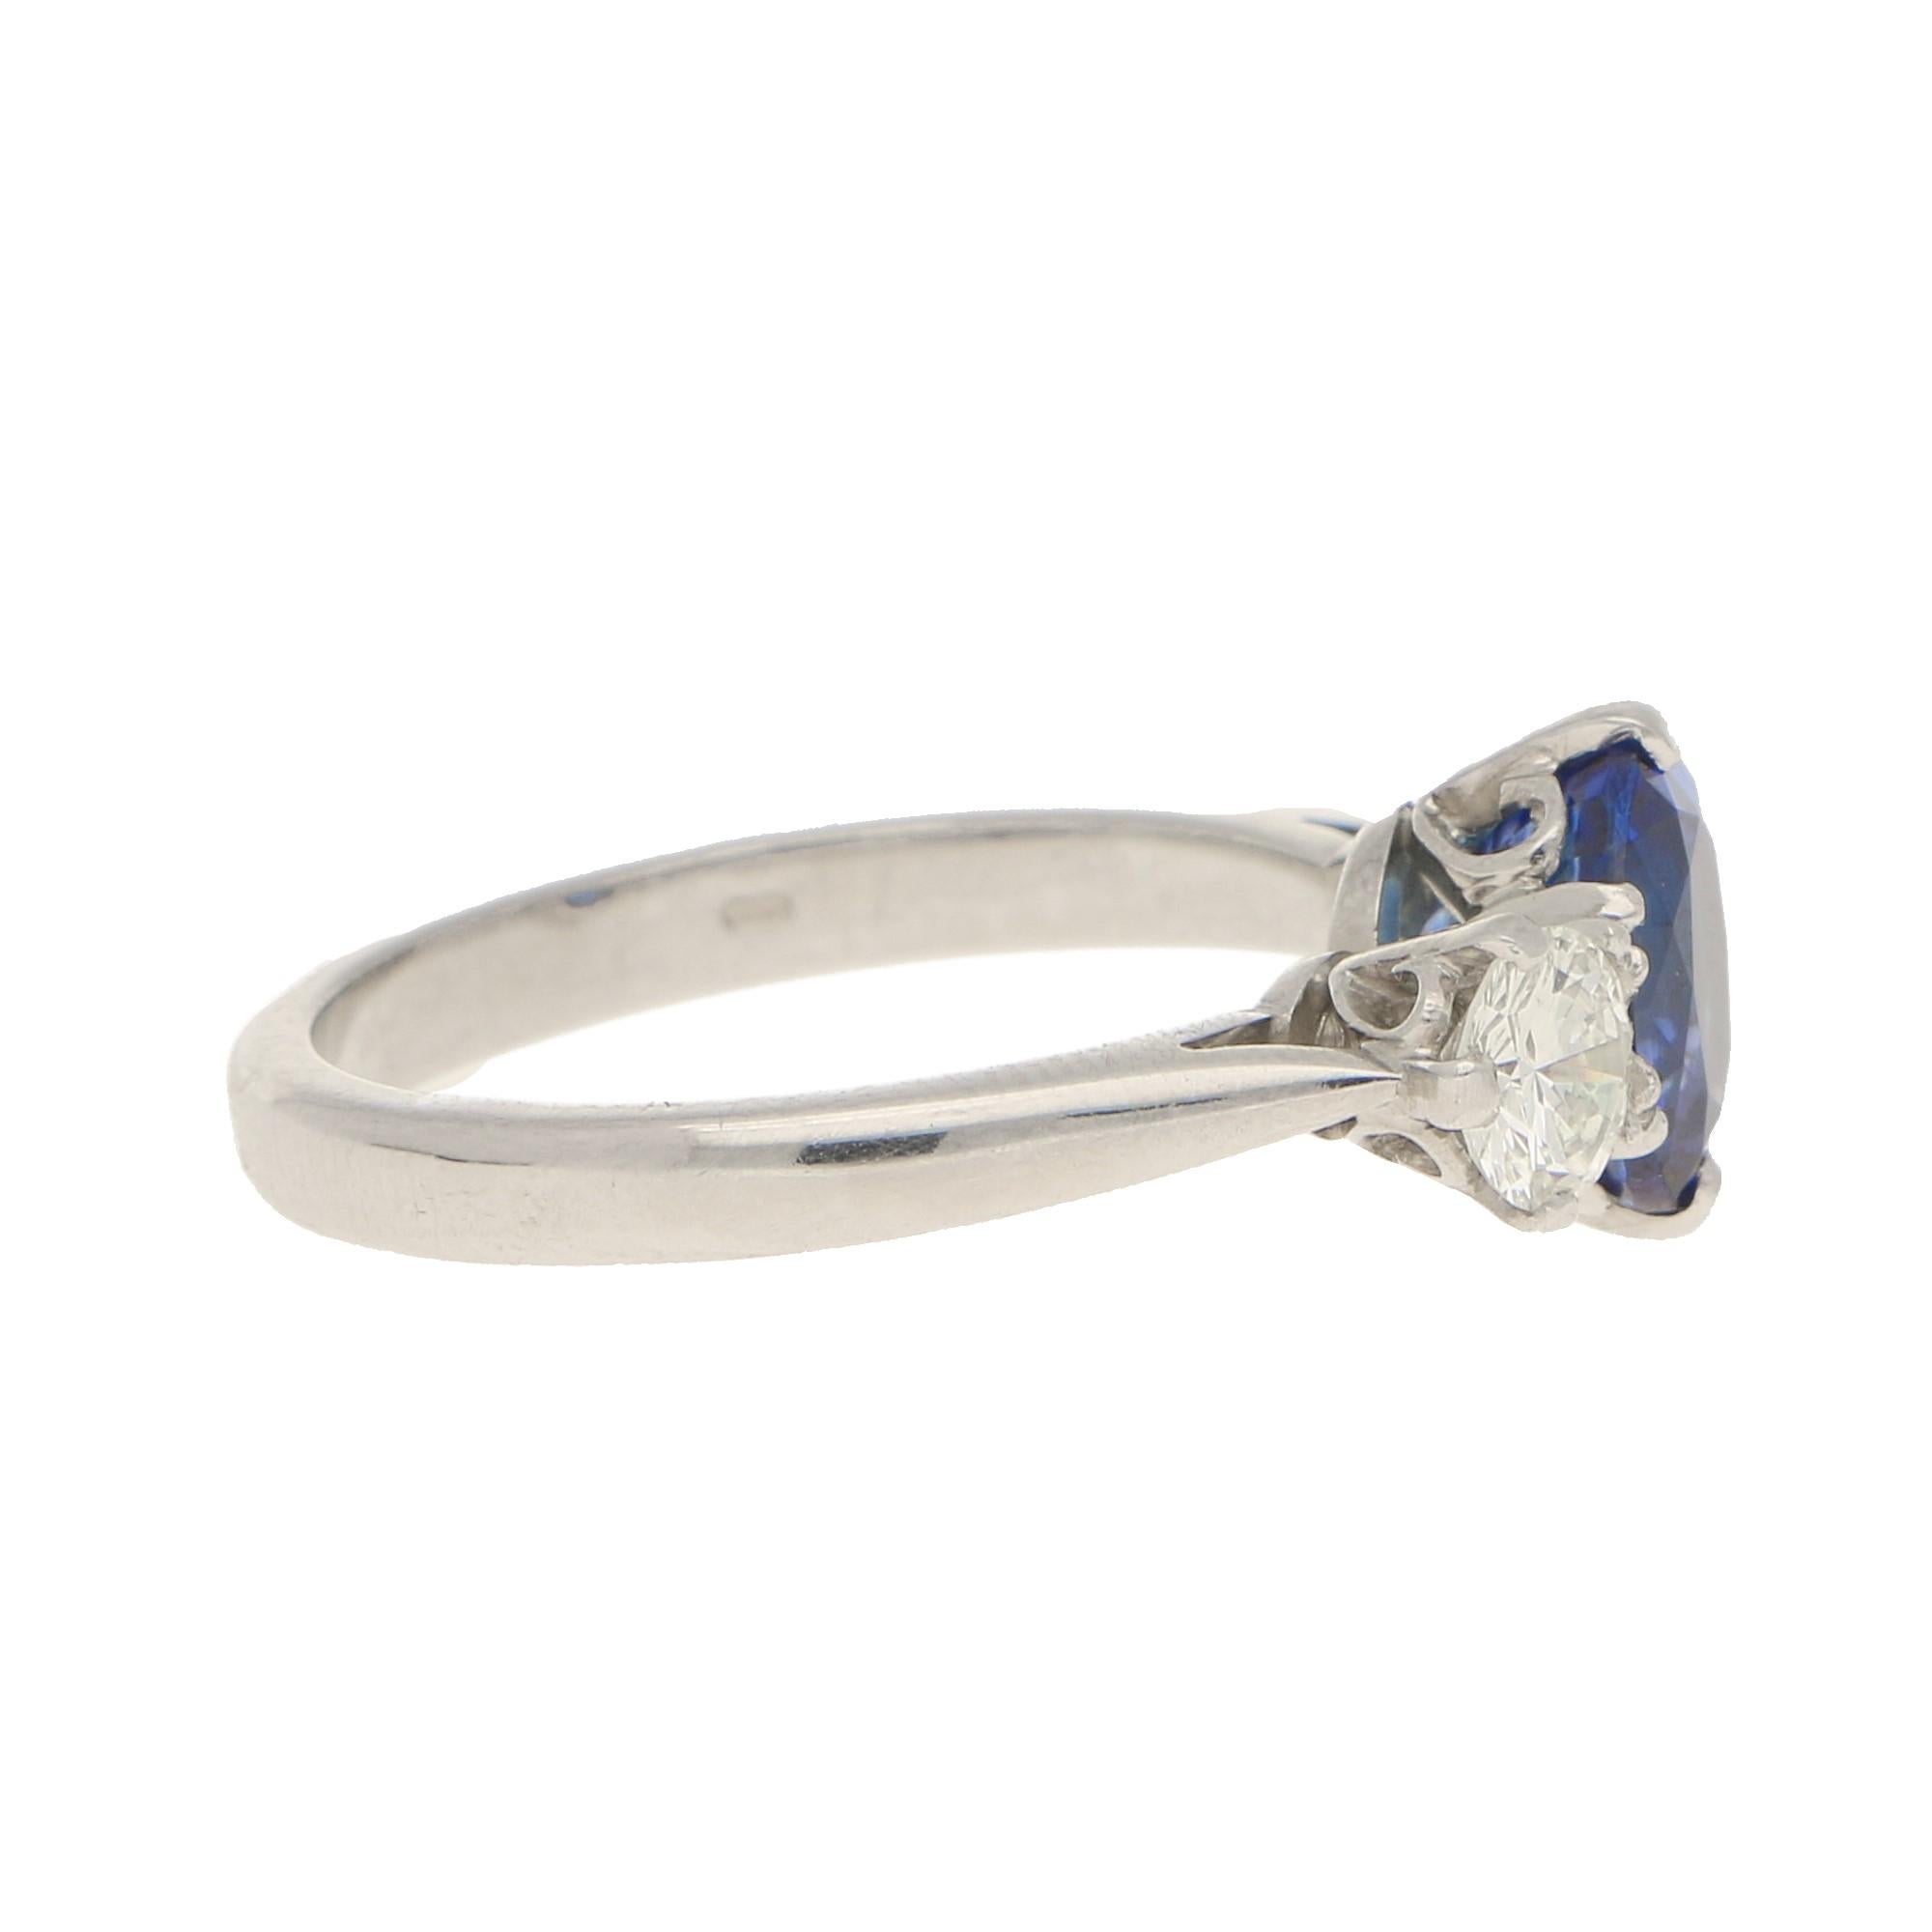 A classic sapphire and diamond three stone ring. The central oval sapphire is 2.41cts, a very beautiful rich blue stone which is complimented by two round brilliant diamonds. The diamonds are 0.3cts and 0.37cts, G/H colour and VS clarity.
